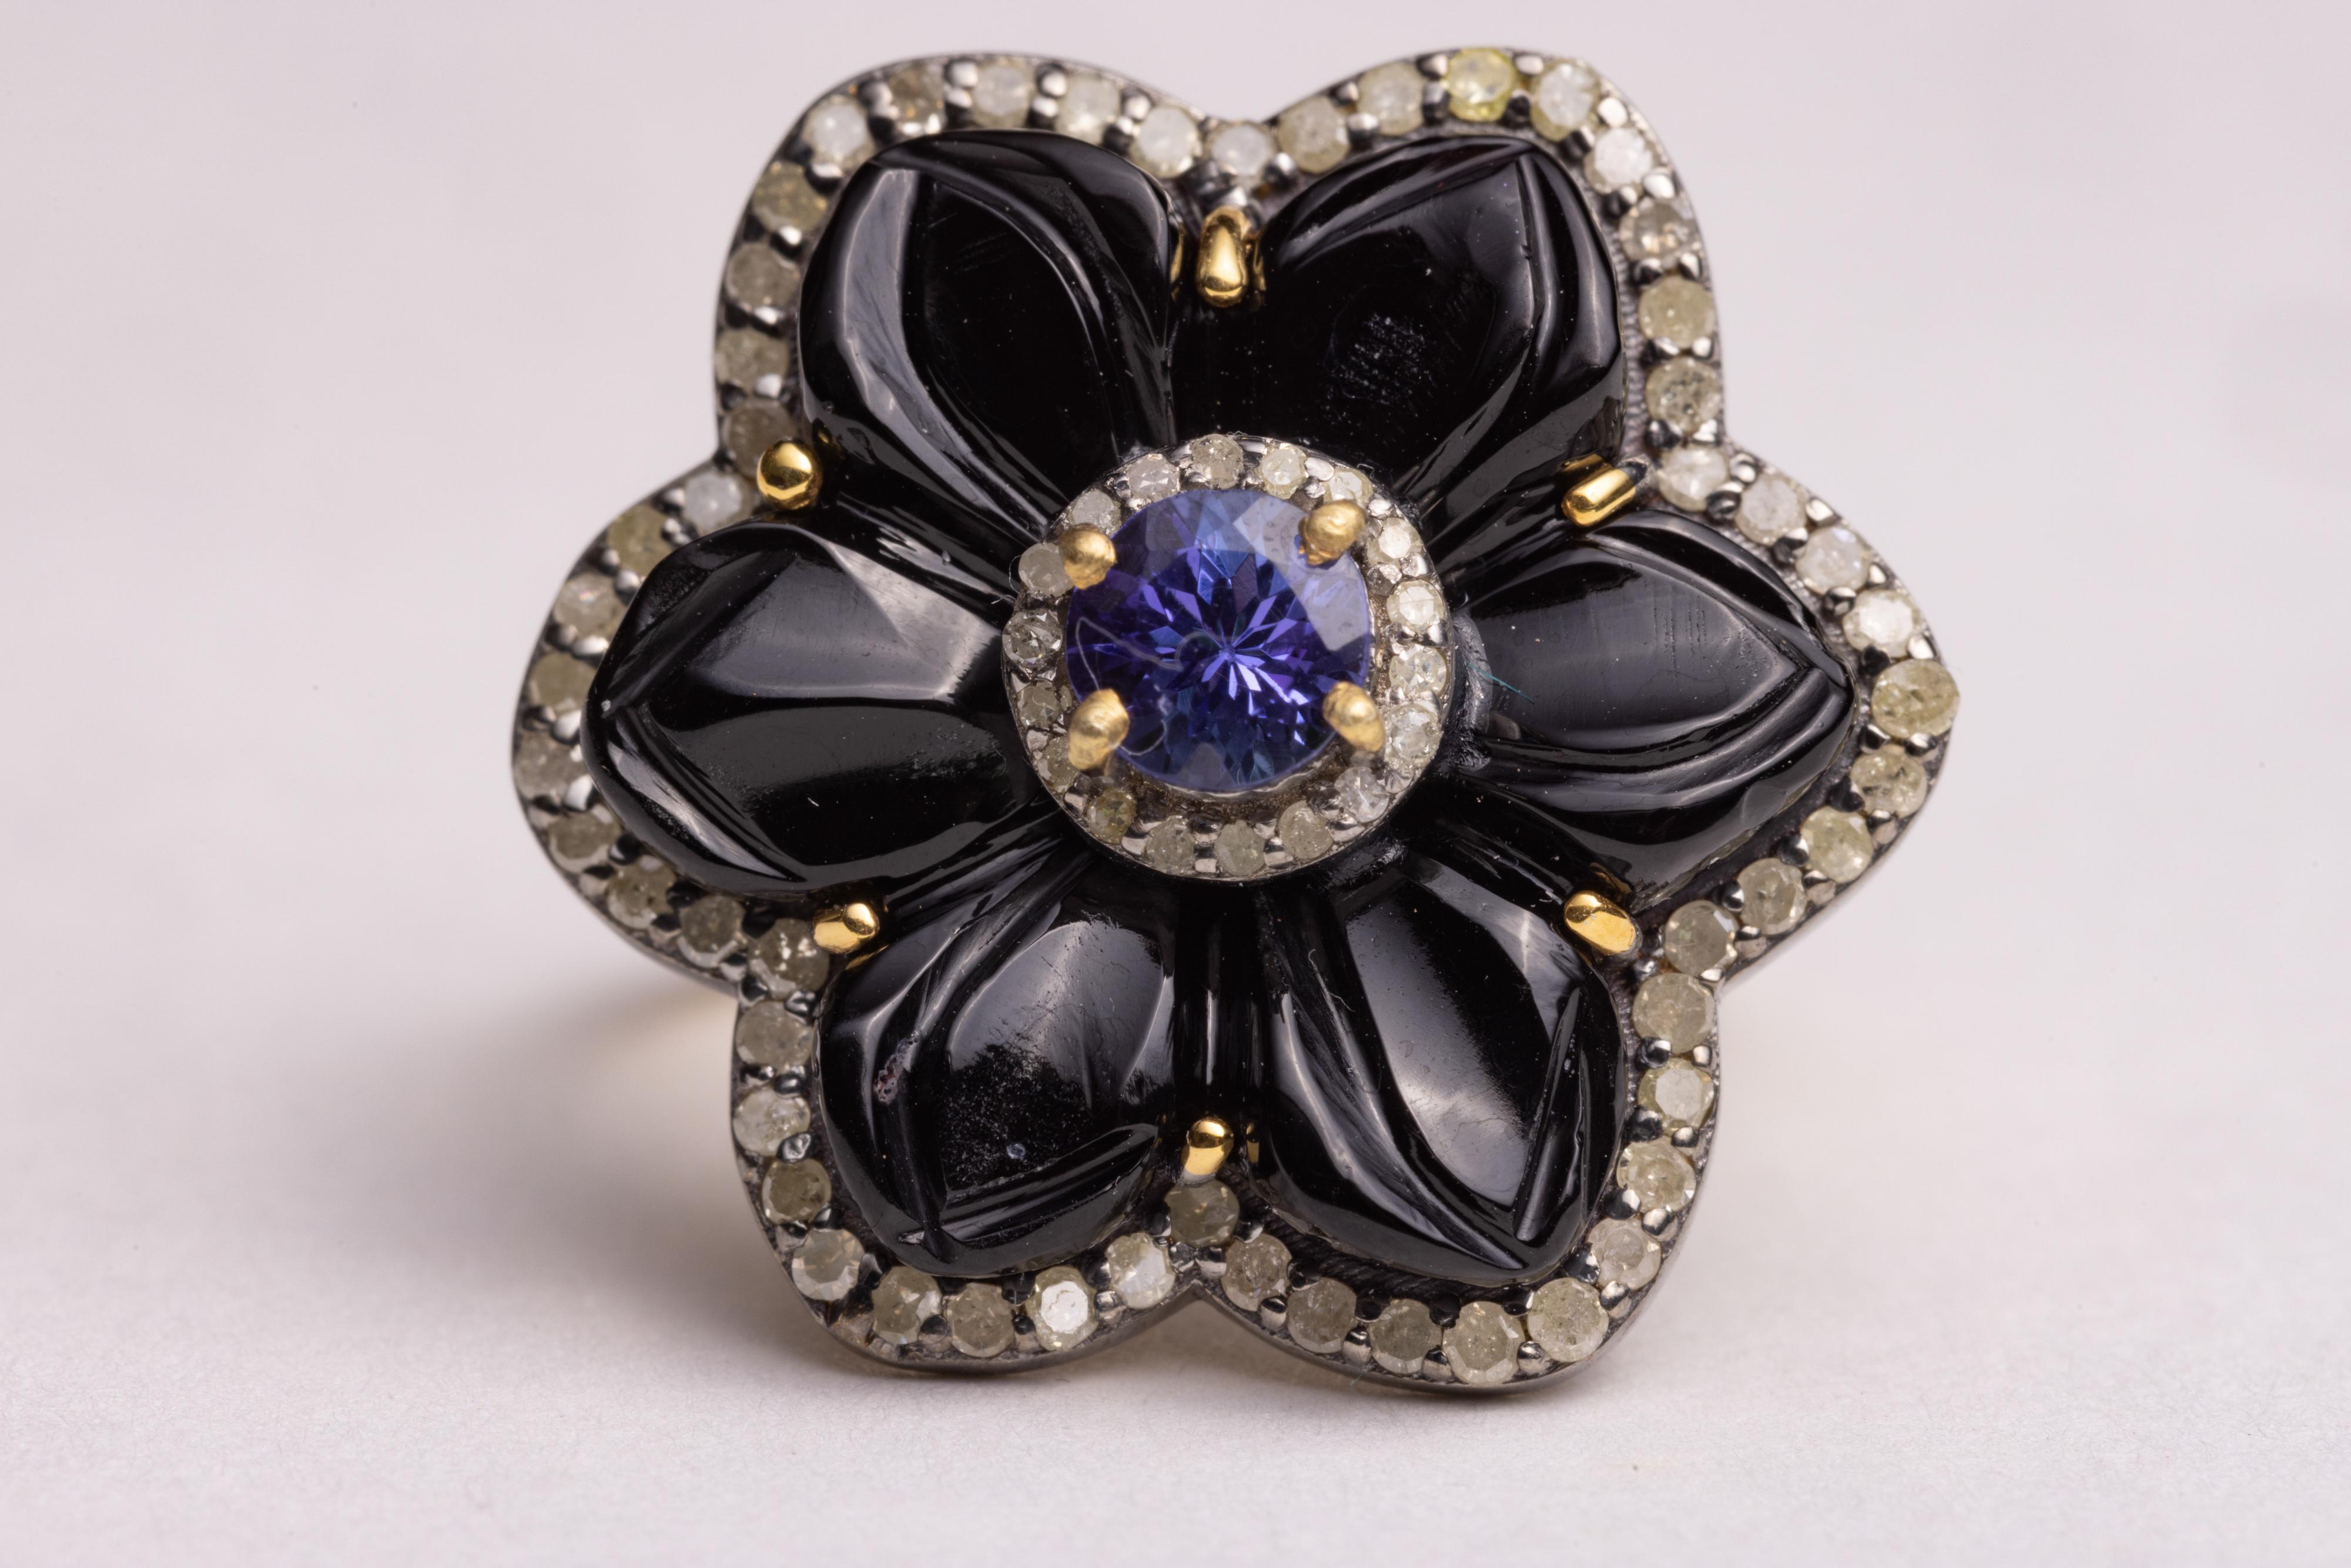 A flower motif cocktail ring in black onyx gemstones carved in the shape of flower petals, bordered with round, brilliant cut diamonds and featuring a round, faceted Tanzanite gemstone in the center. Vermeil 18K gold band.  The diamonds total .61